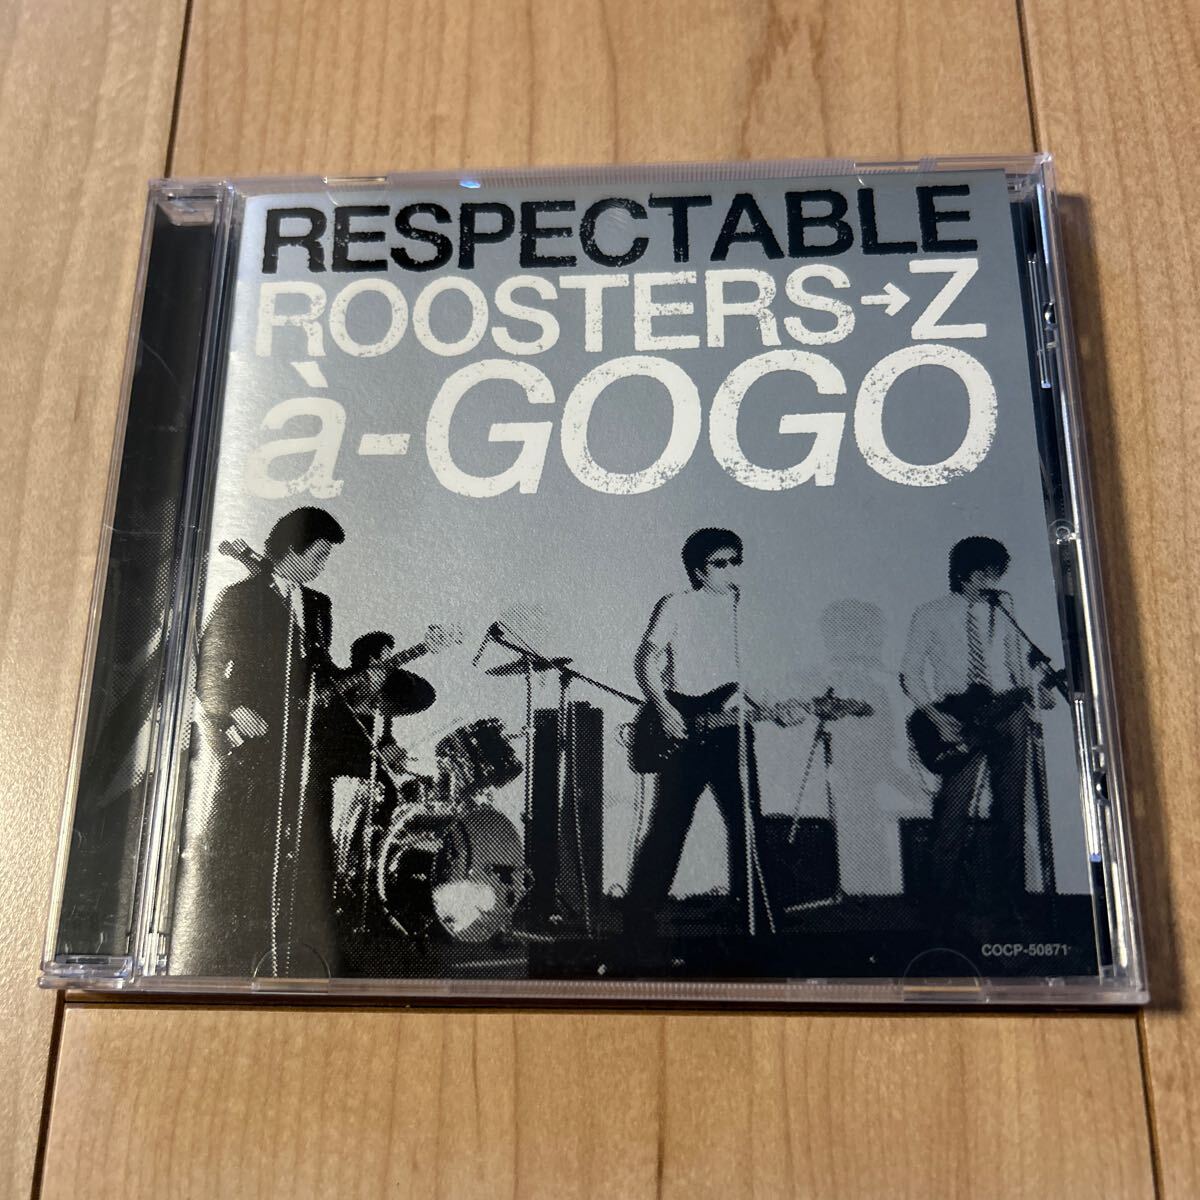 「RESPECTABLE ROOSTERS→Z a→GOGO」サンプル盤 斉藤和義 勝手にしやがれ THE BACK HORN HEATWAVE グループ魂_画像1